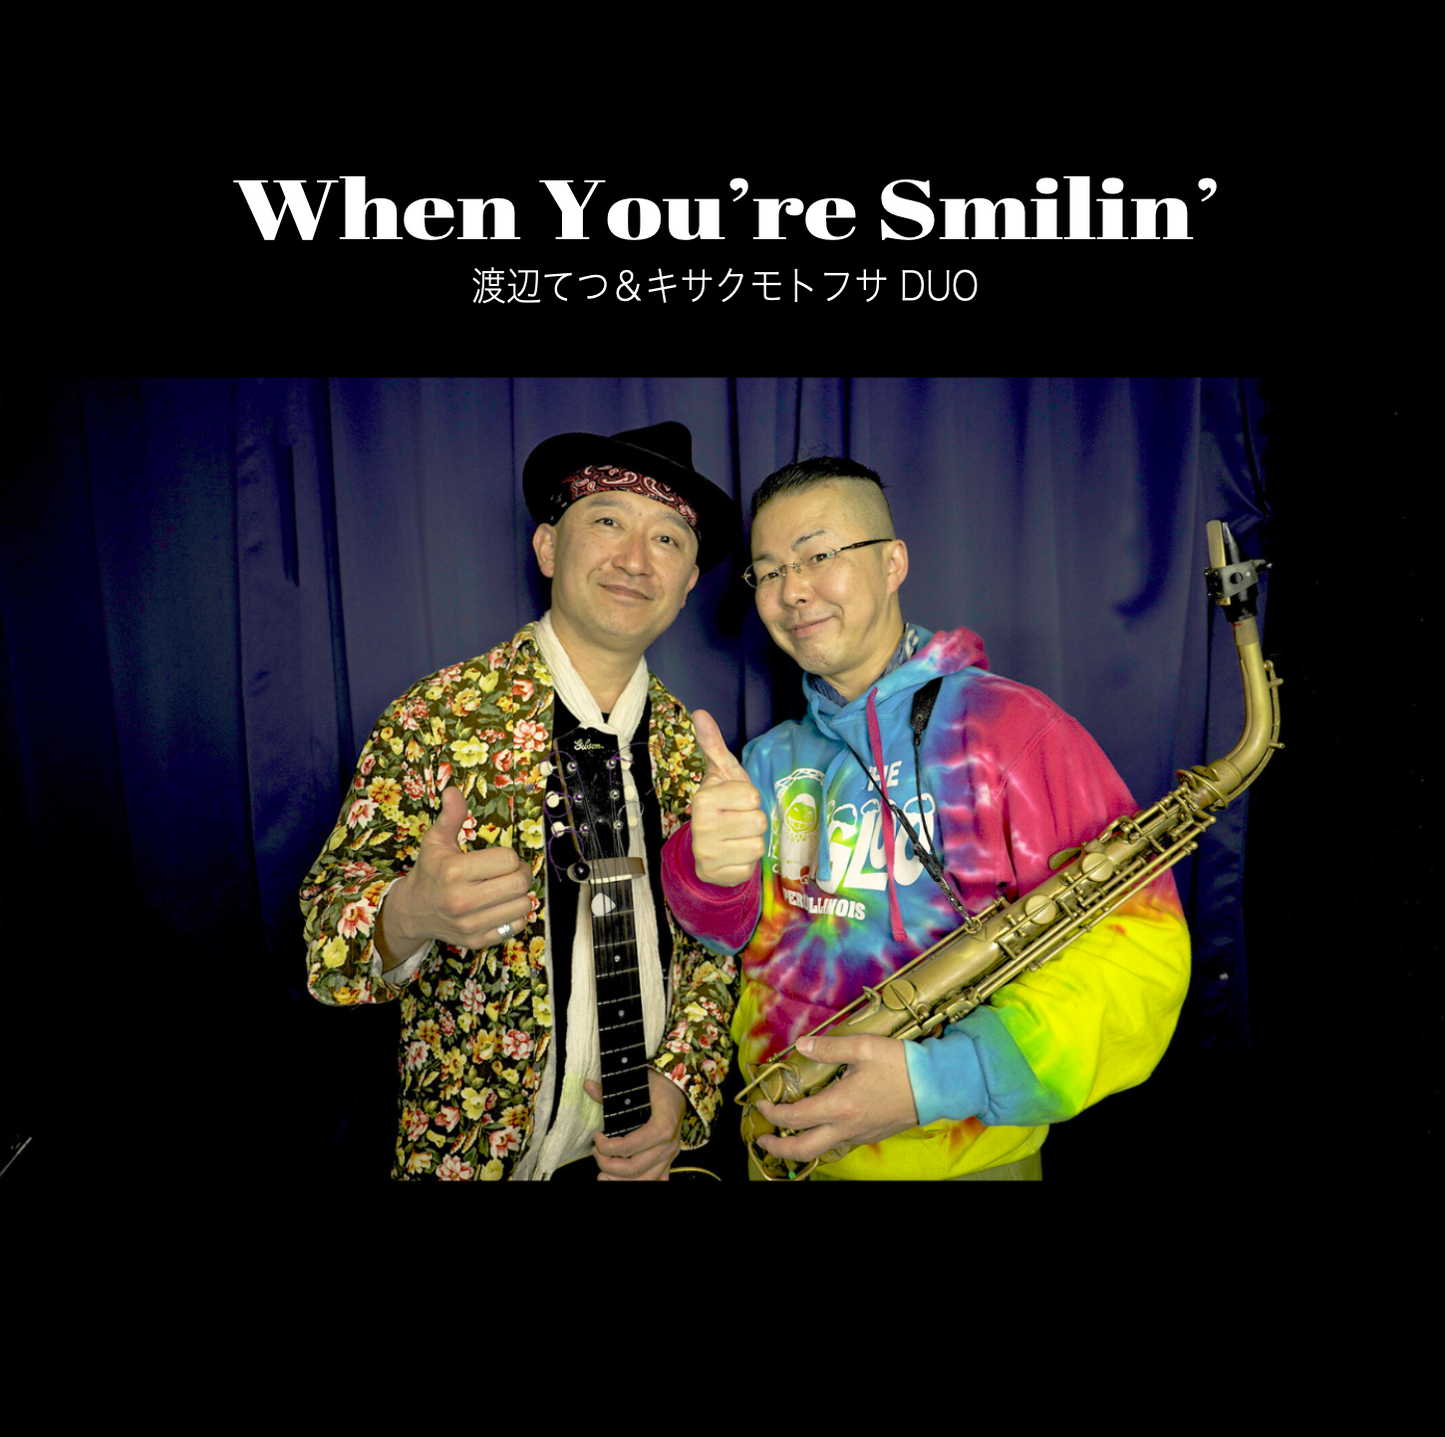 When You're Smilin'  渡辺てつ＆キサクモトフサDUO